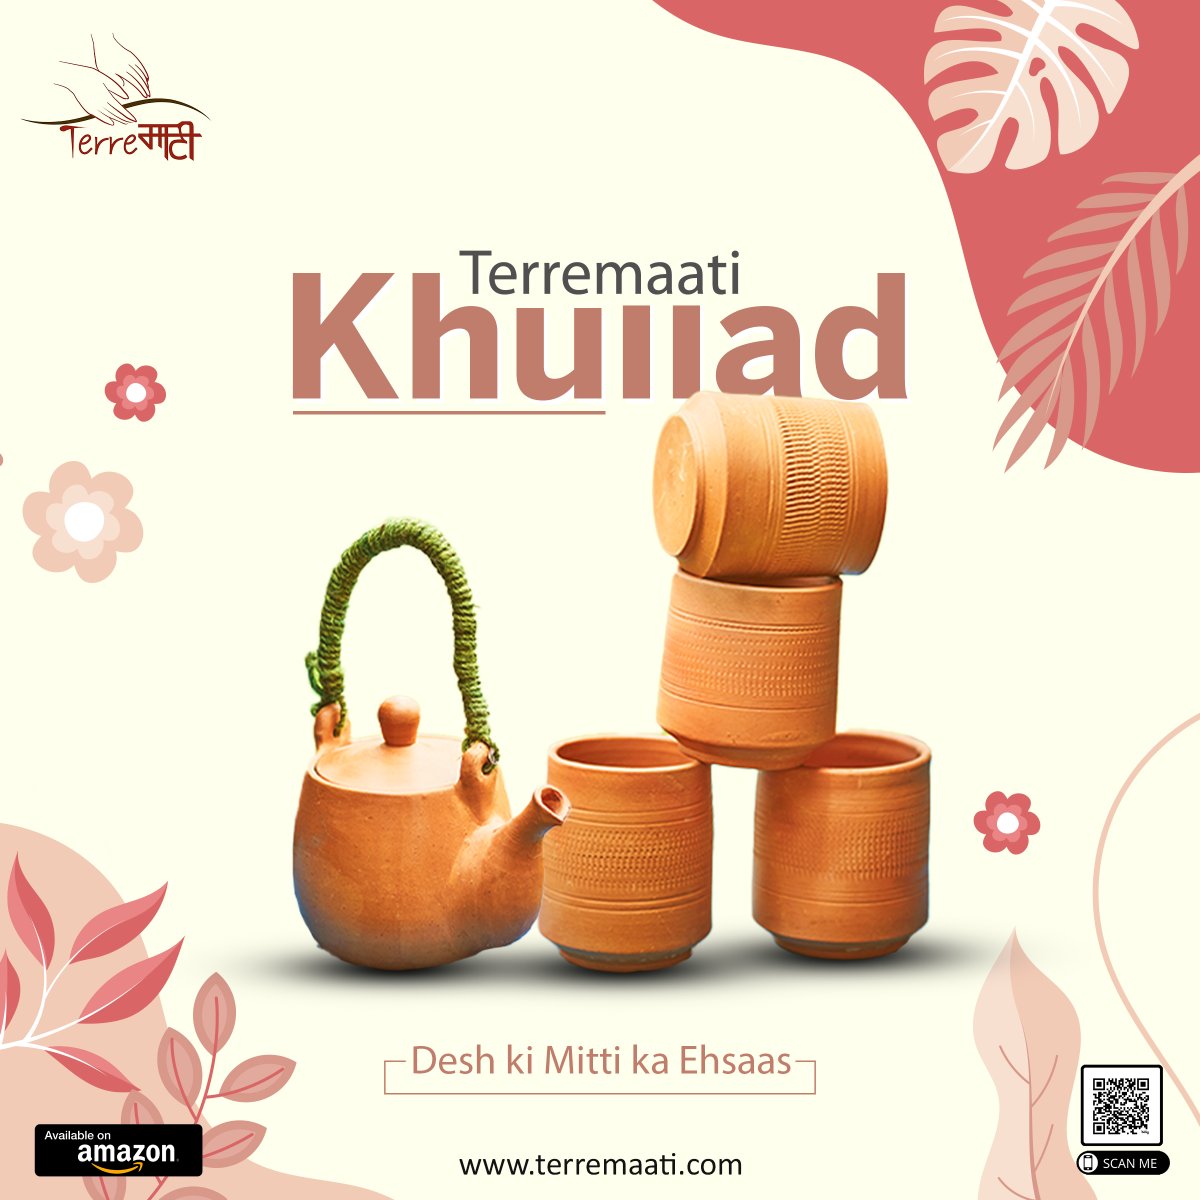 ❤️ Indulge in the Nostalgia of Chai in a Traditional Khullad! 💖 Experience the Unique Taste and Aroma That Only Traditional Indian Pottery Can Provide. ✨🔥

View on Amazon: amzn.to/3wcxgru

#Terremaati #Terracotta #Kulhad #Chai #ChaiLover #TeaTime #Tea #IndianTea